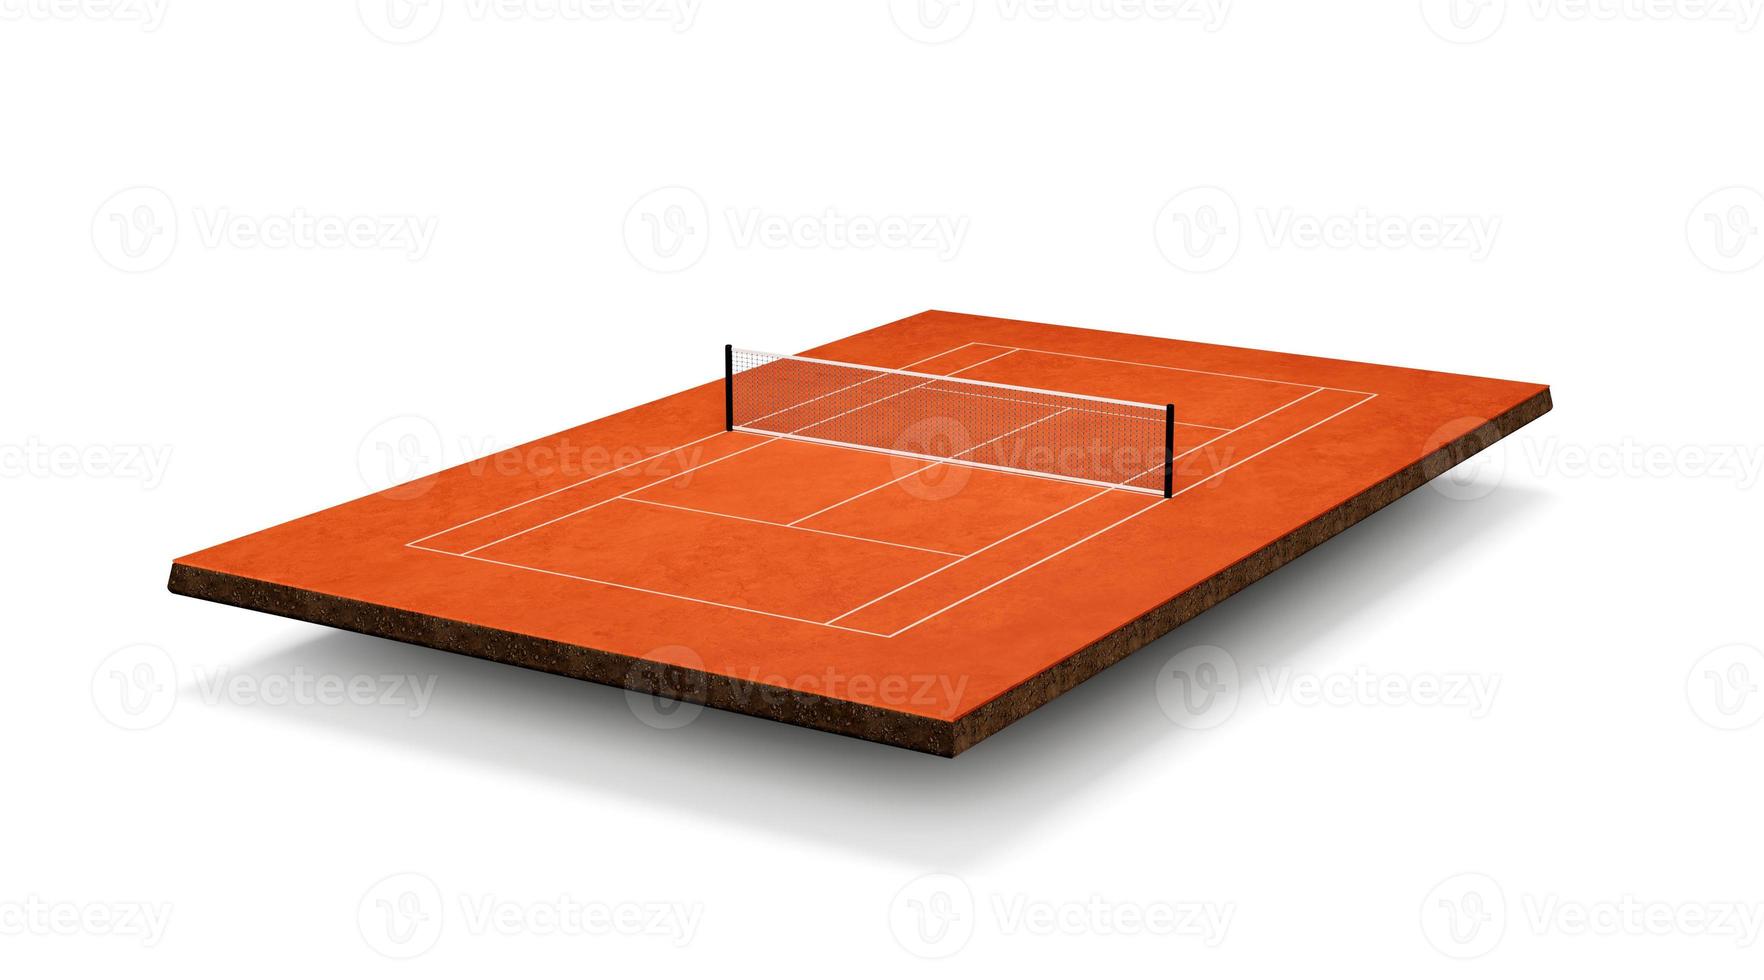 Tennis court Clay Top view field Court field with markings. Play on red clay court, Tennis net 3d illustration photo